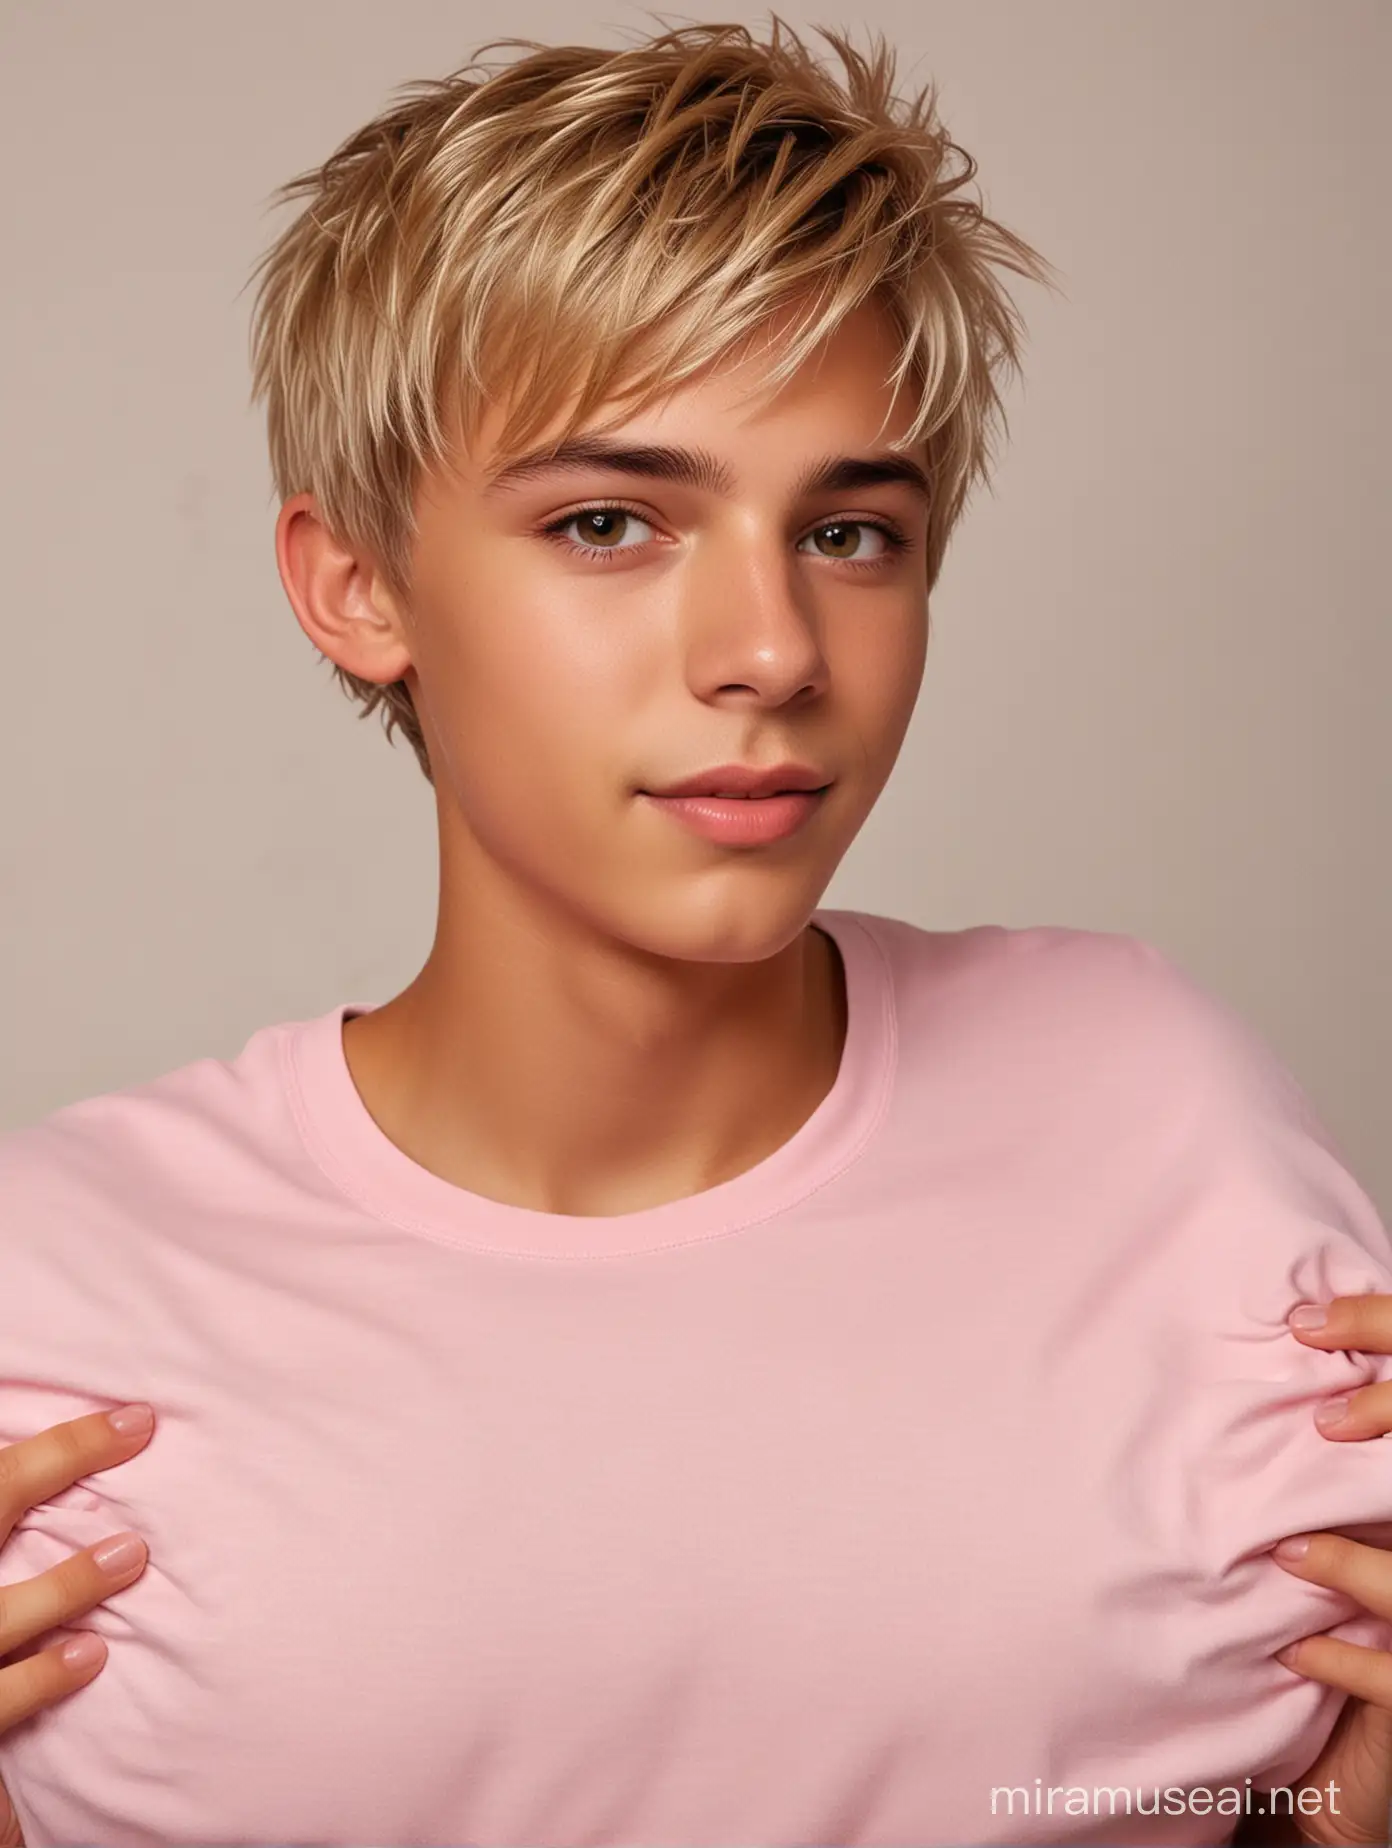 Handsome Teenage Boy with Blond Hair Hugging Pillow on Bed